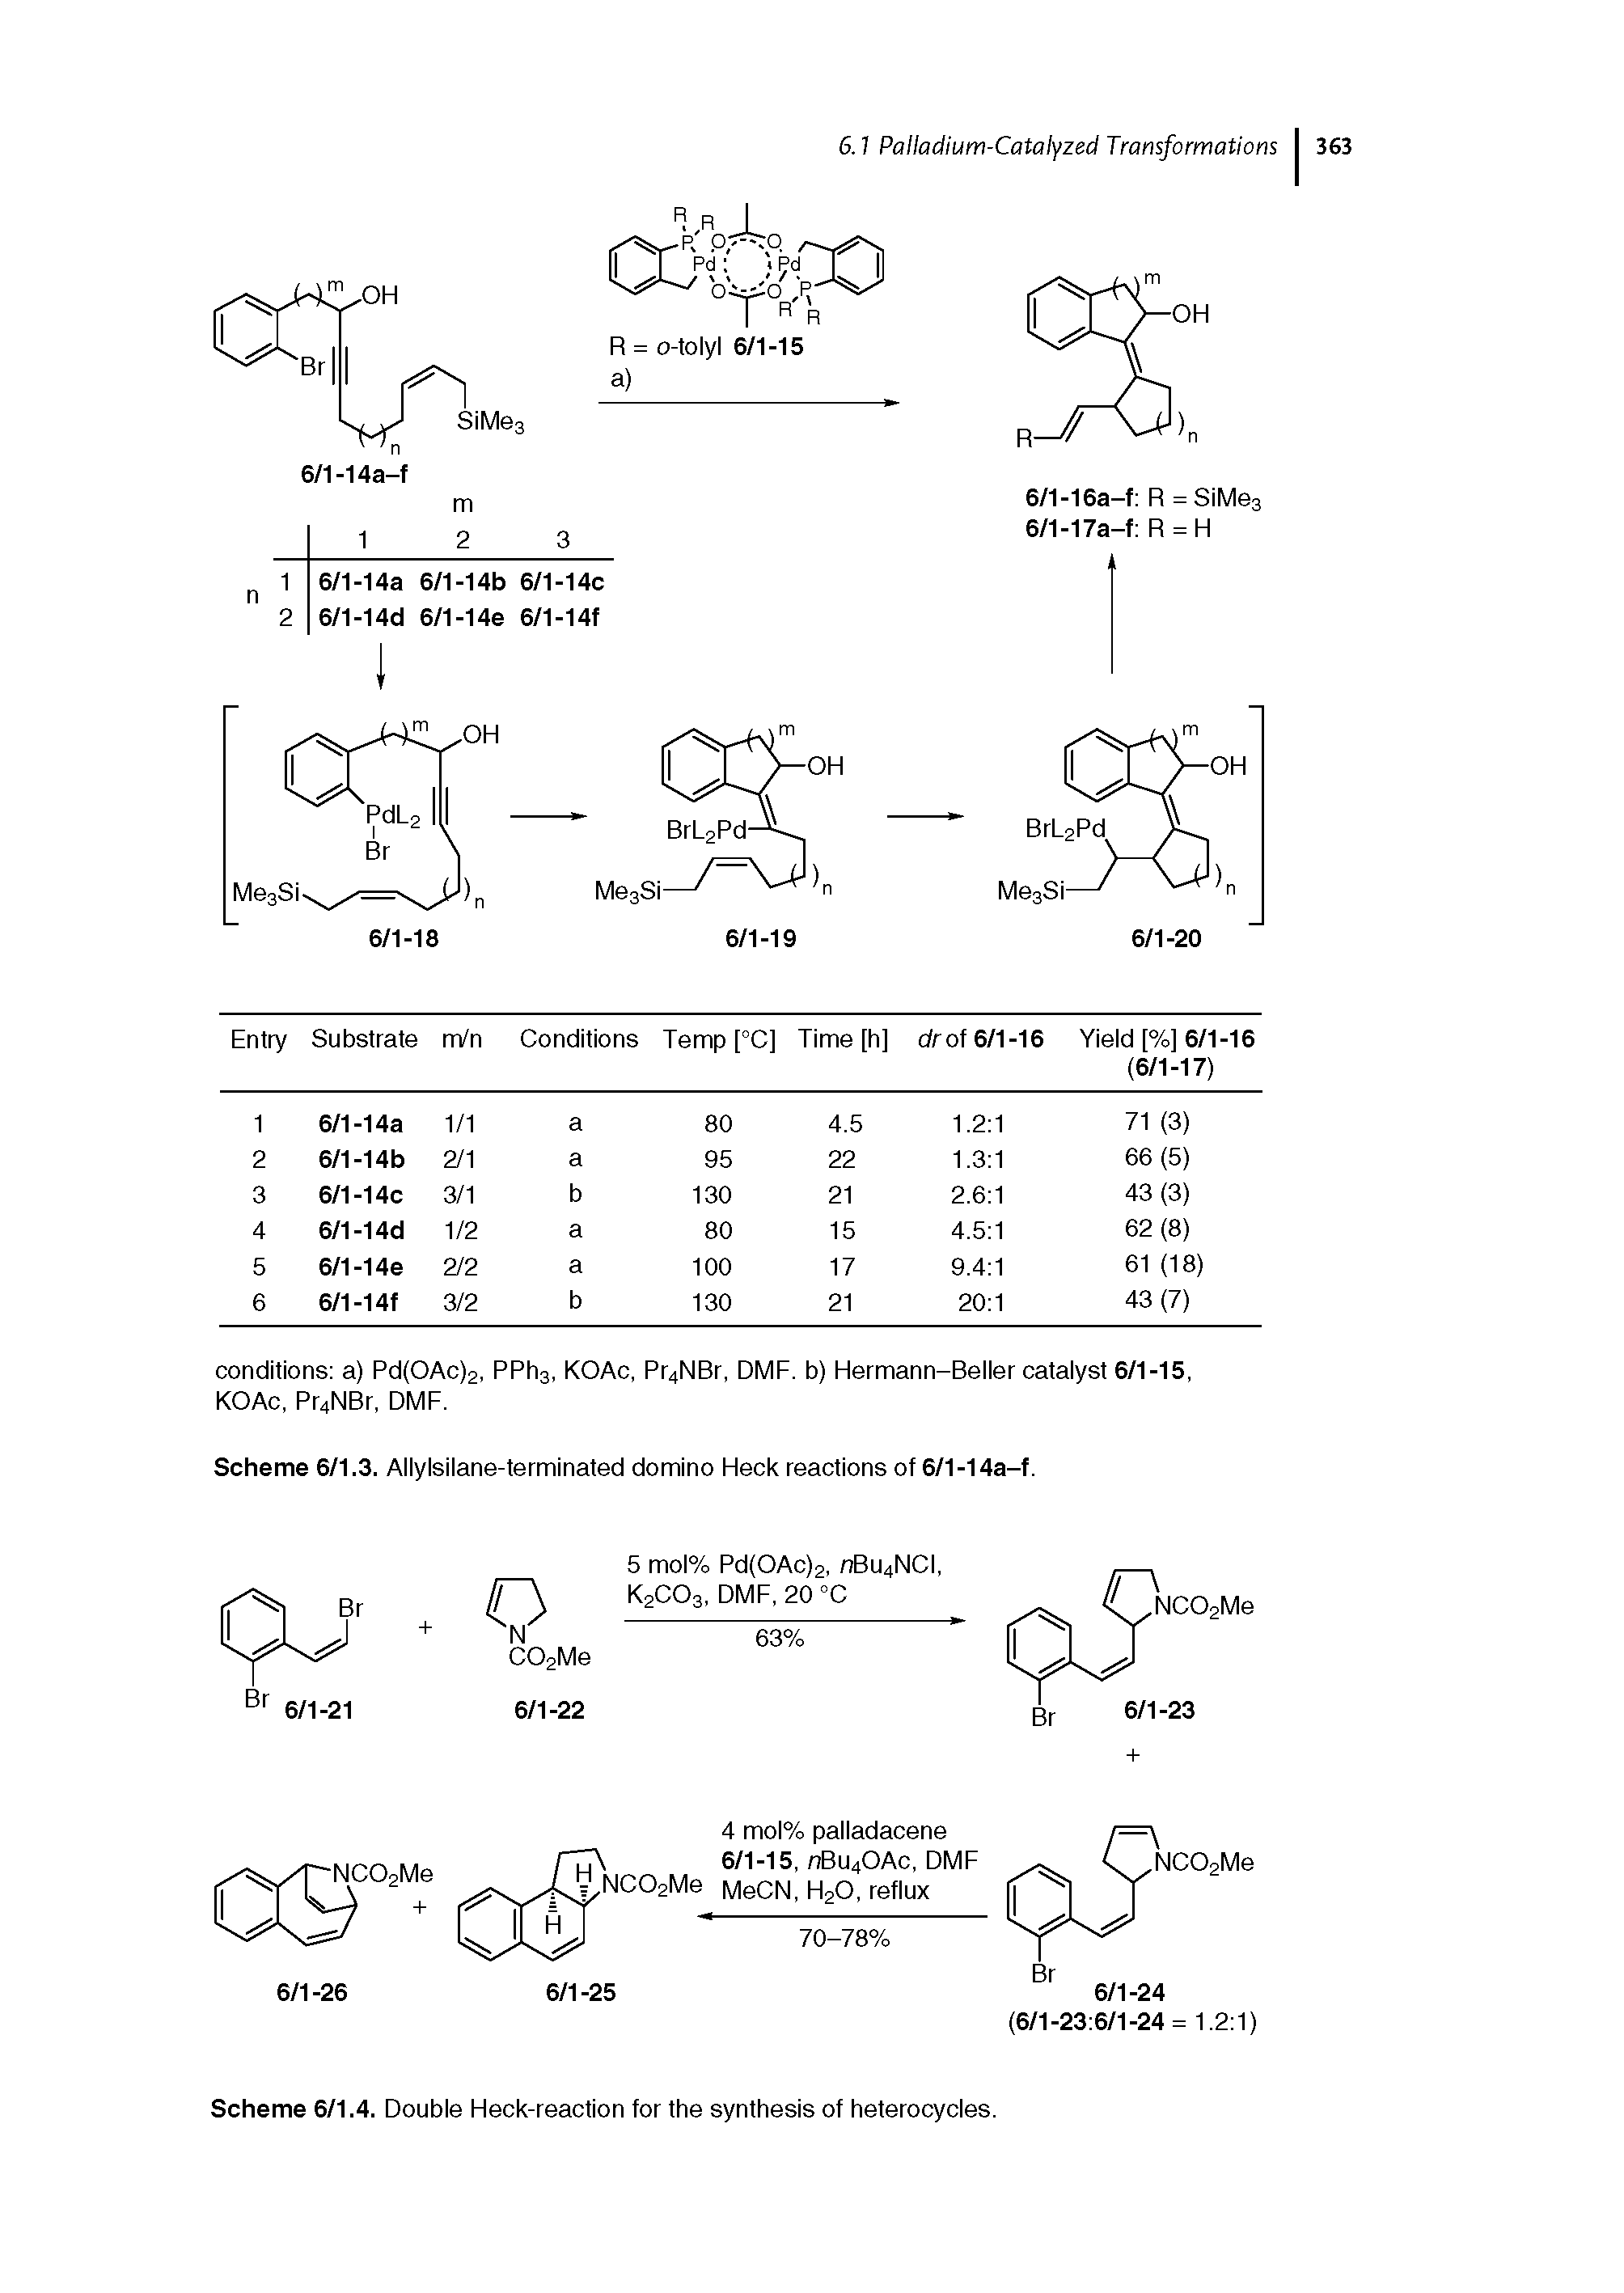 Scheme 6/1.4. Double Heck-reaction for the synthesis of heterocycles.